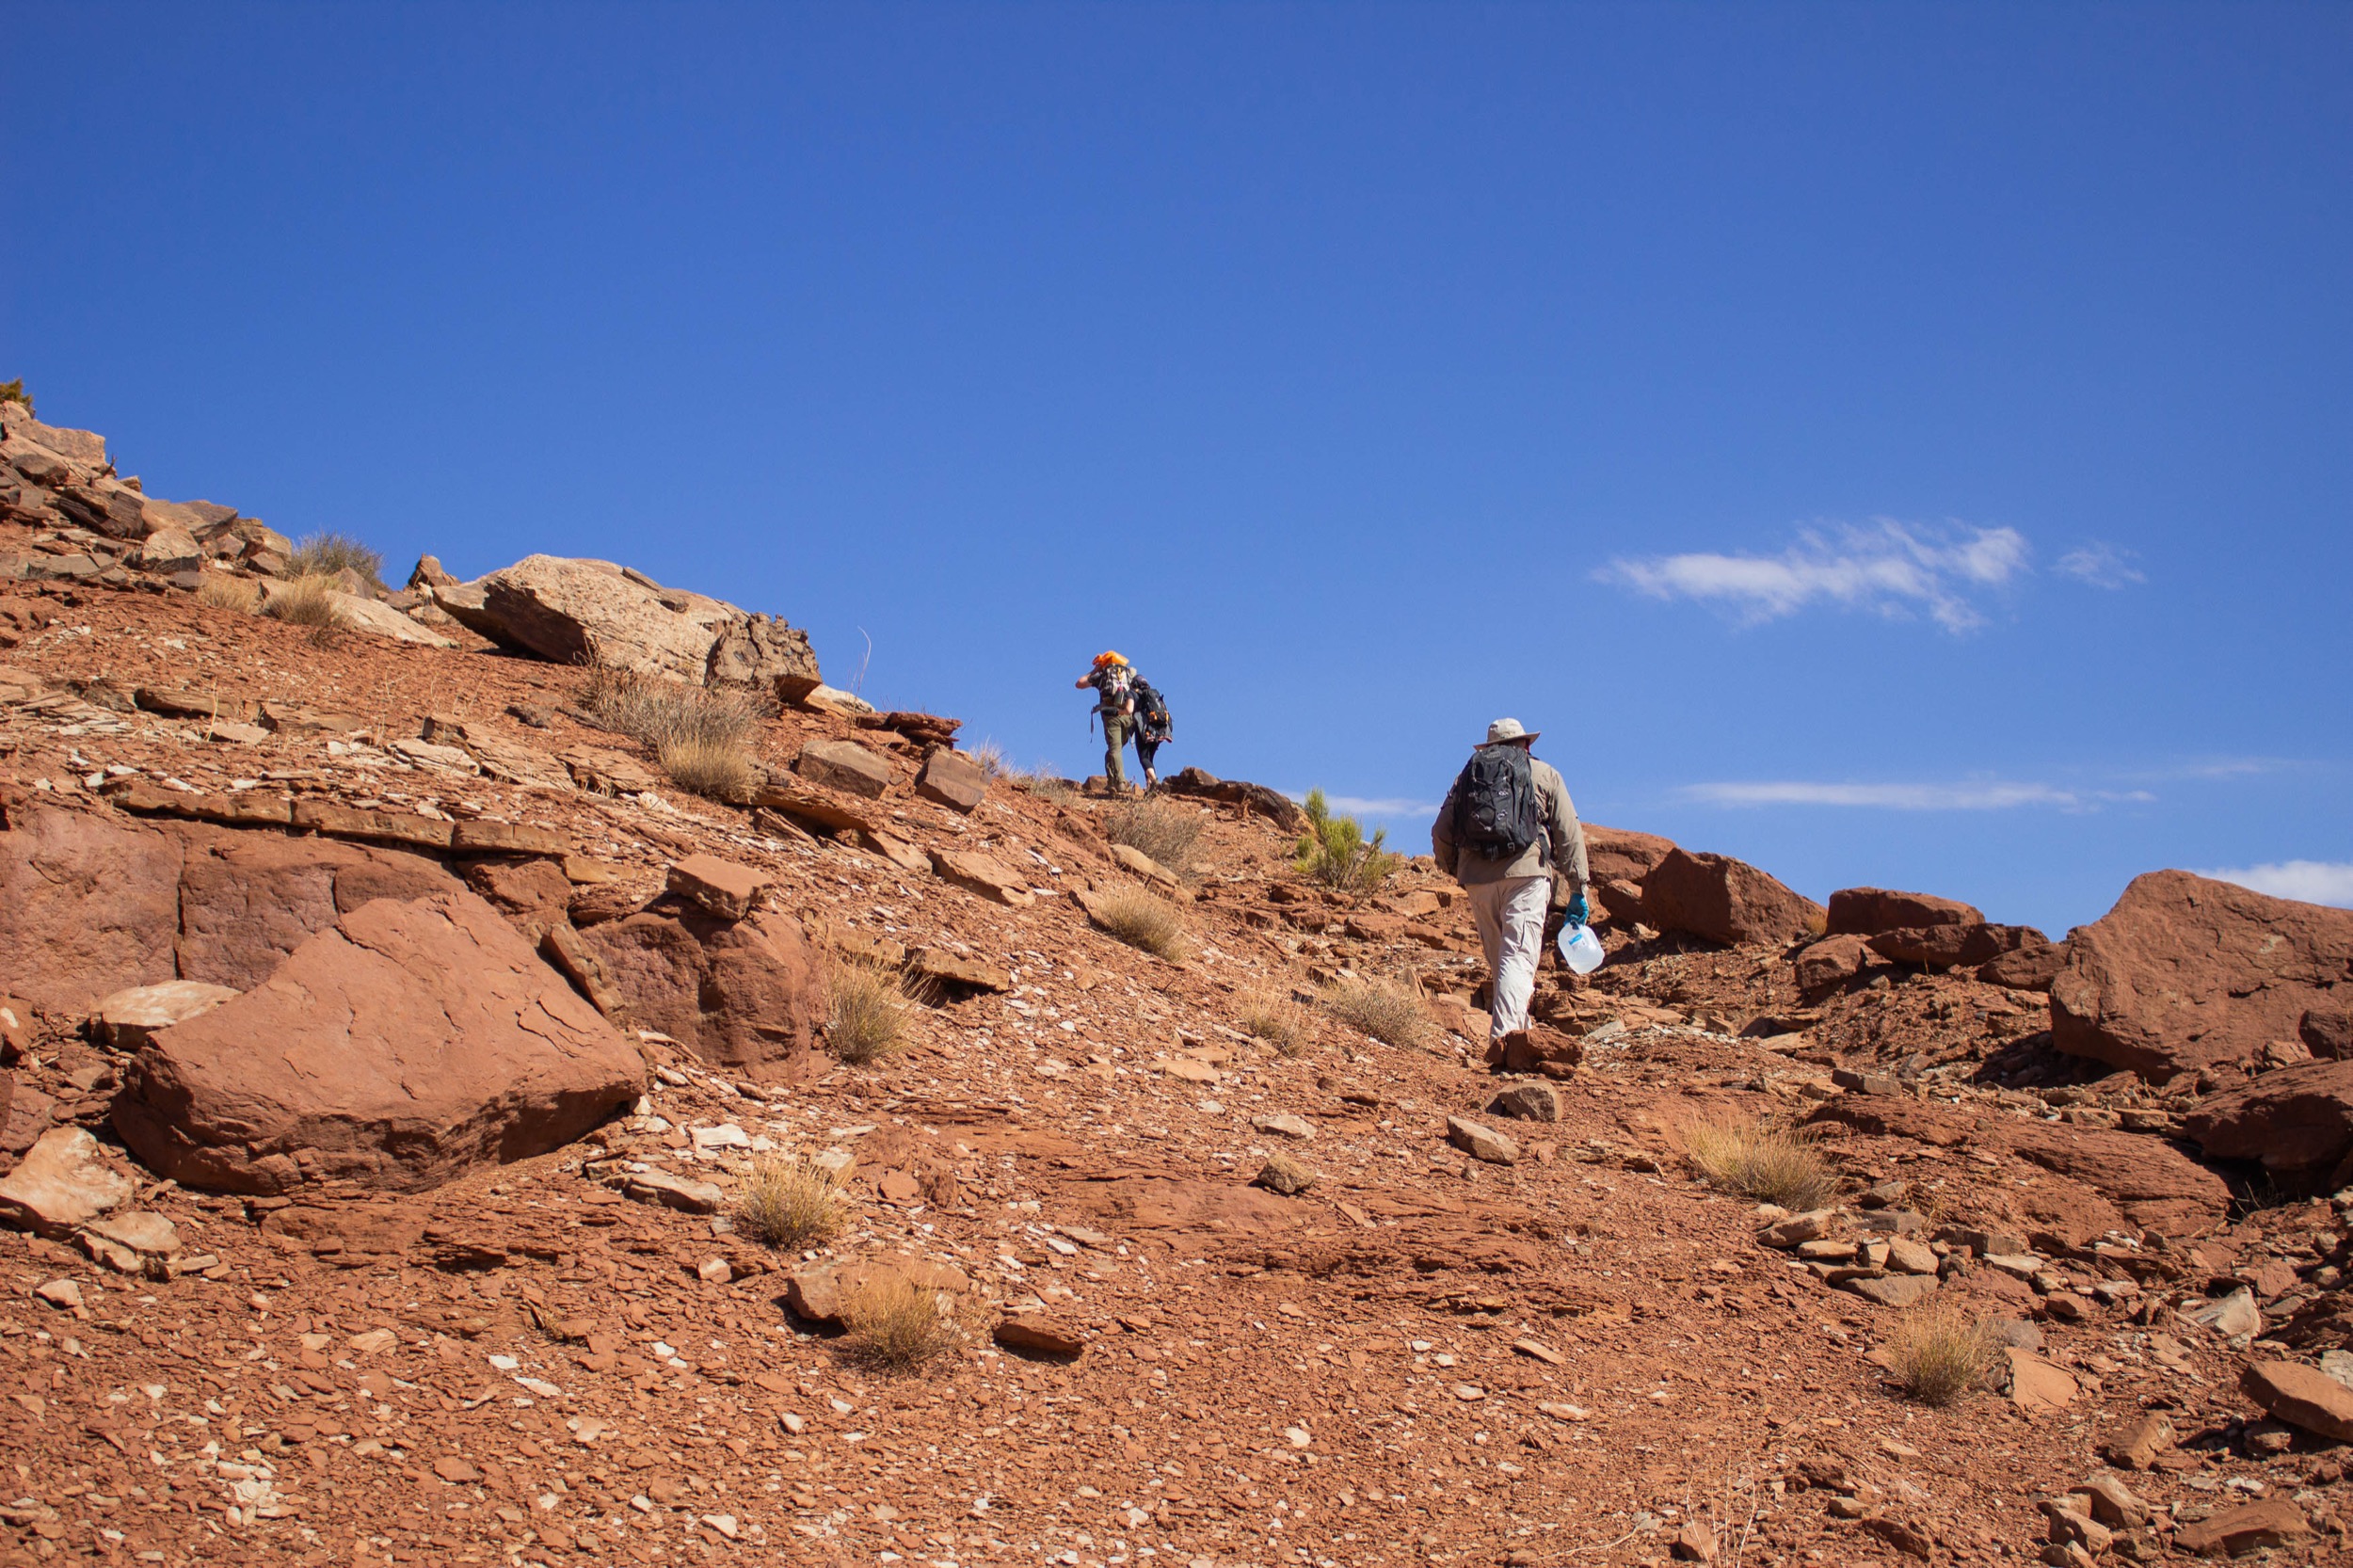 three people hike up a steep incline during a bright sunny day